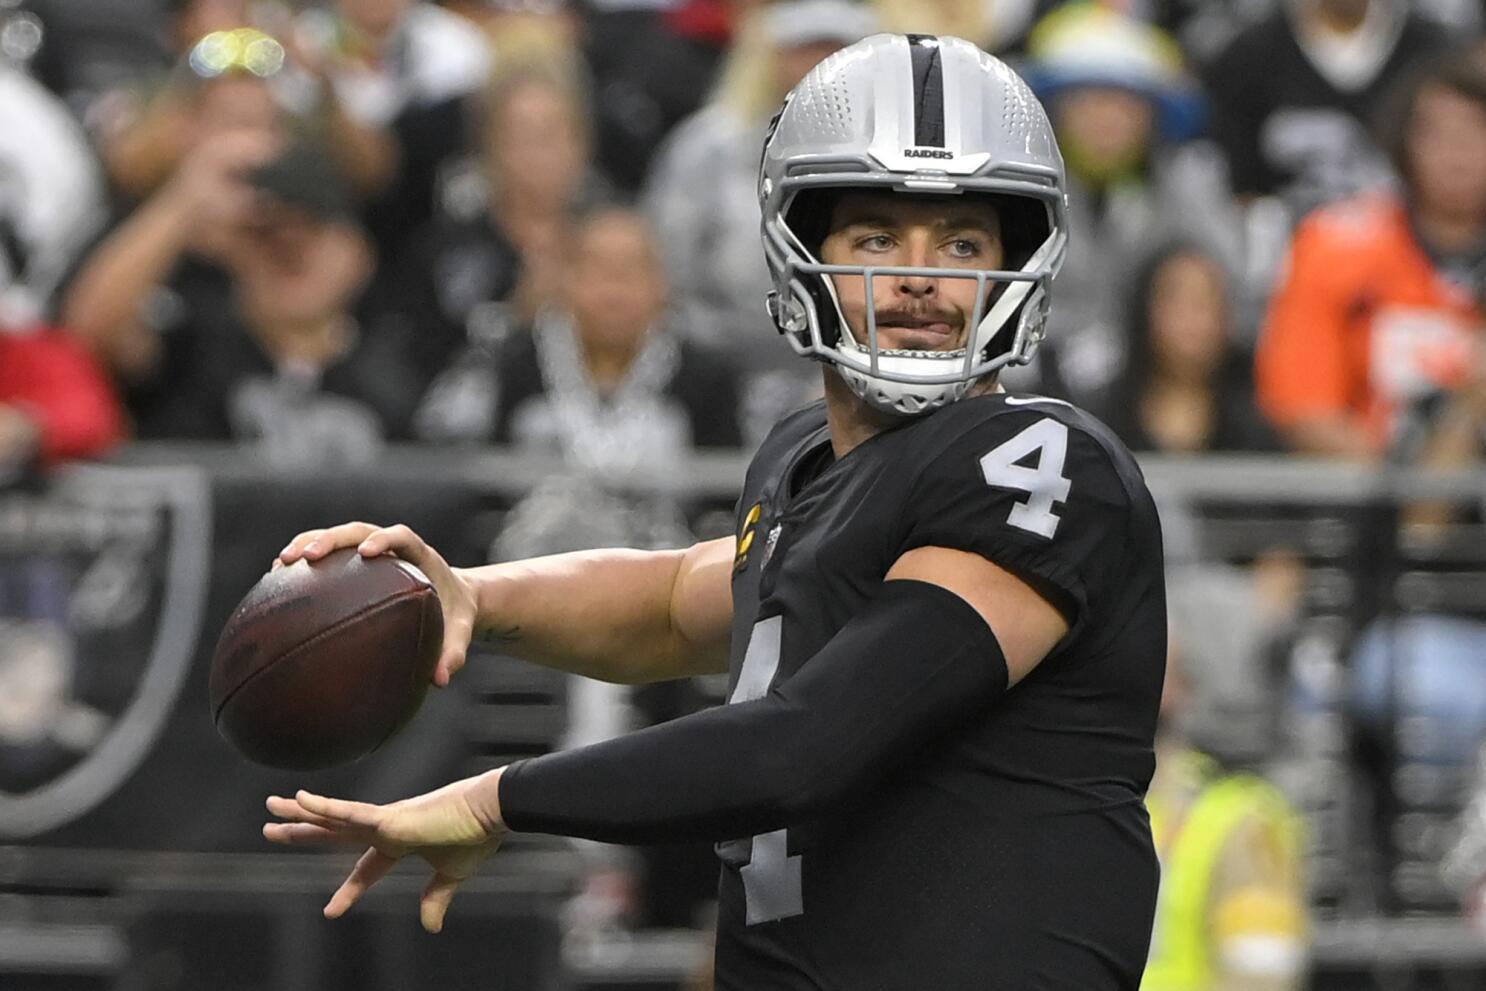 Raiders' playoff hopes remain alive after morning games